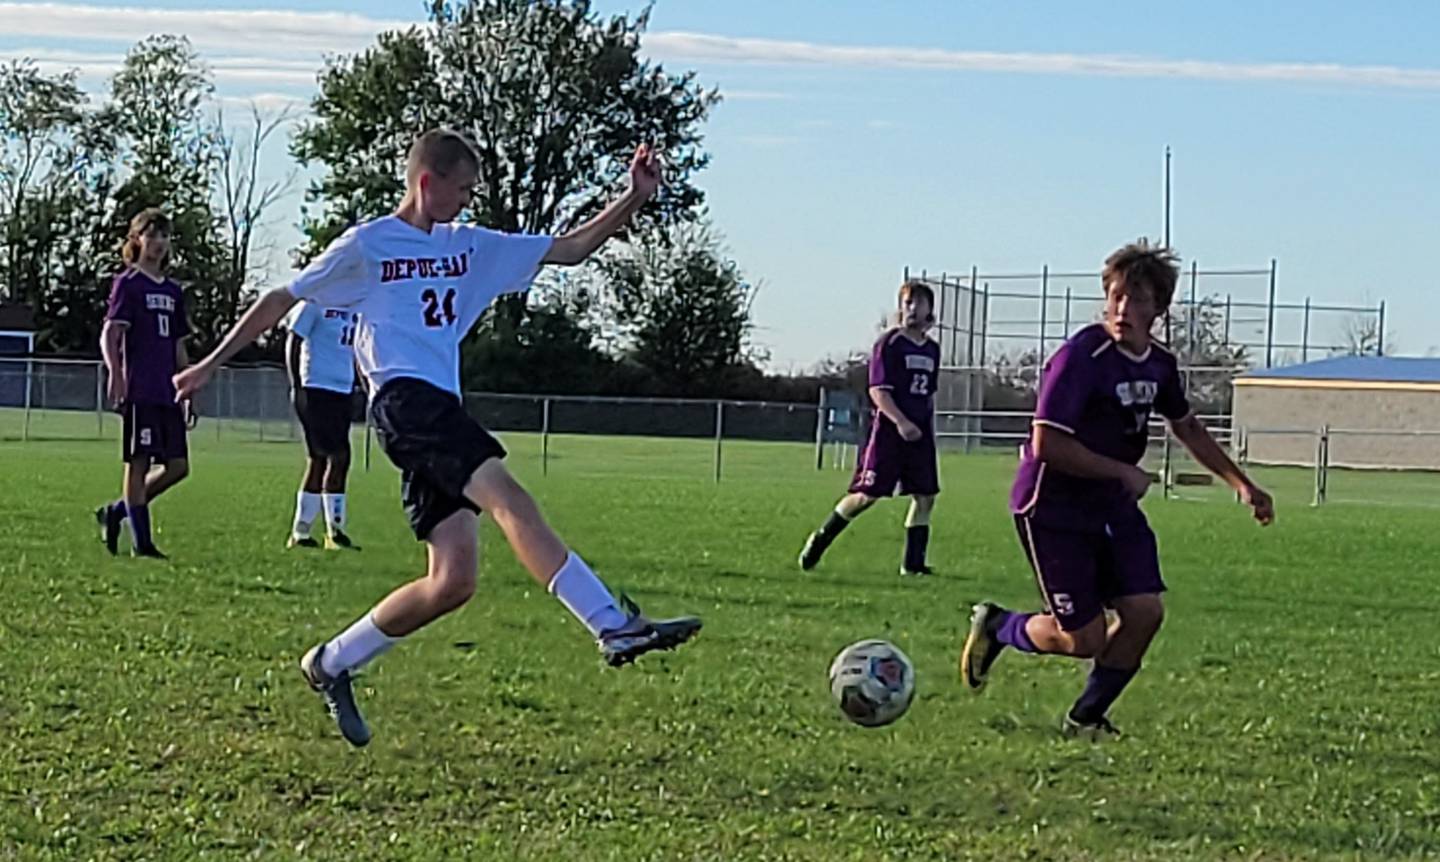 DePue-Hall's Nathan Harrison kicks the past Serena's Mason McNelis during Thursday's Class 1A boys soccer regional semifinal at Serena High School. The Huskers advanced with a 2-1 win over the Little Giants.